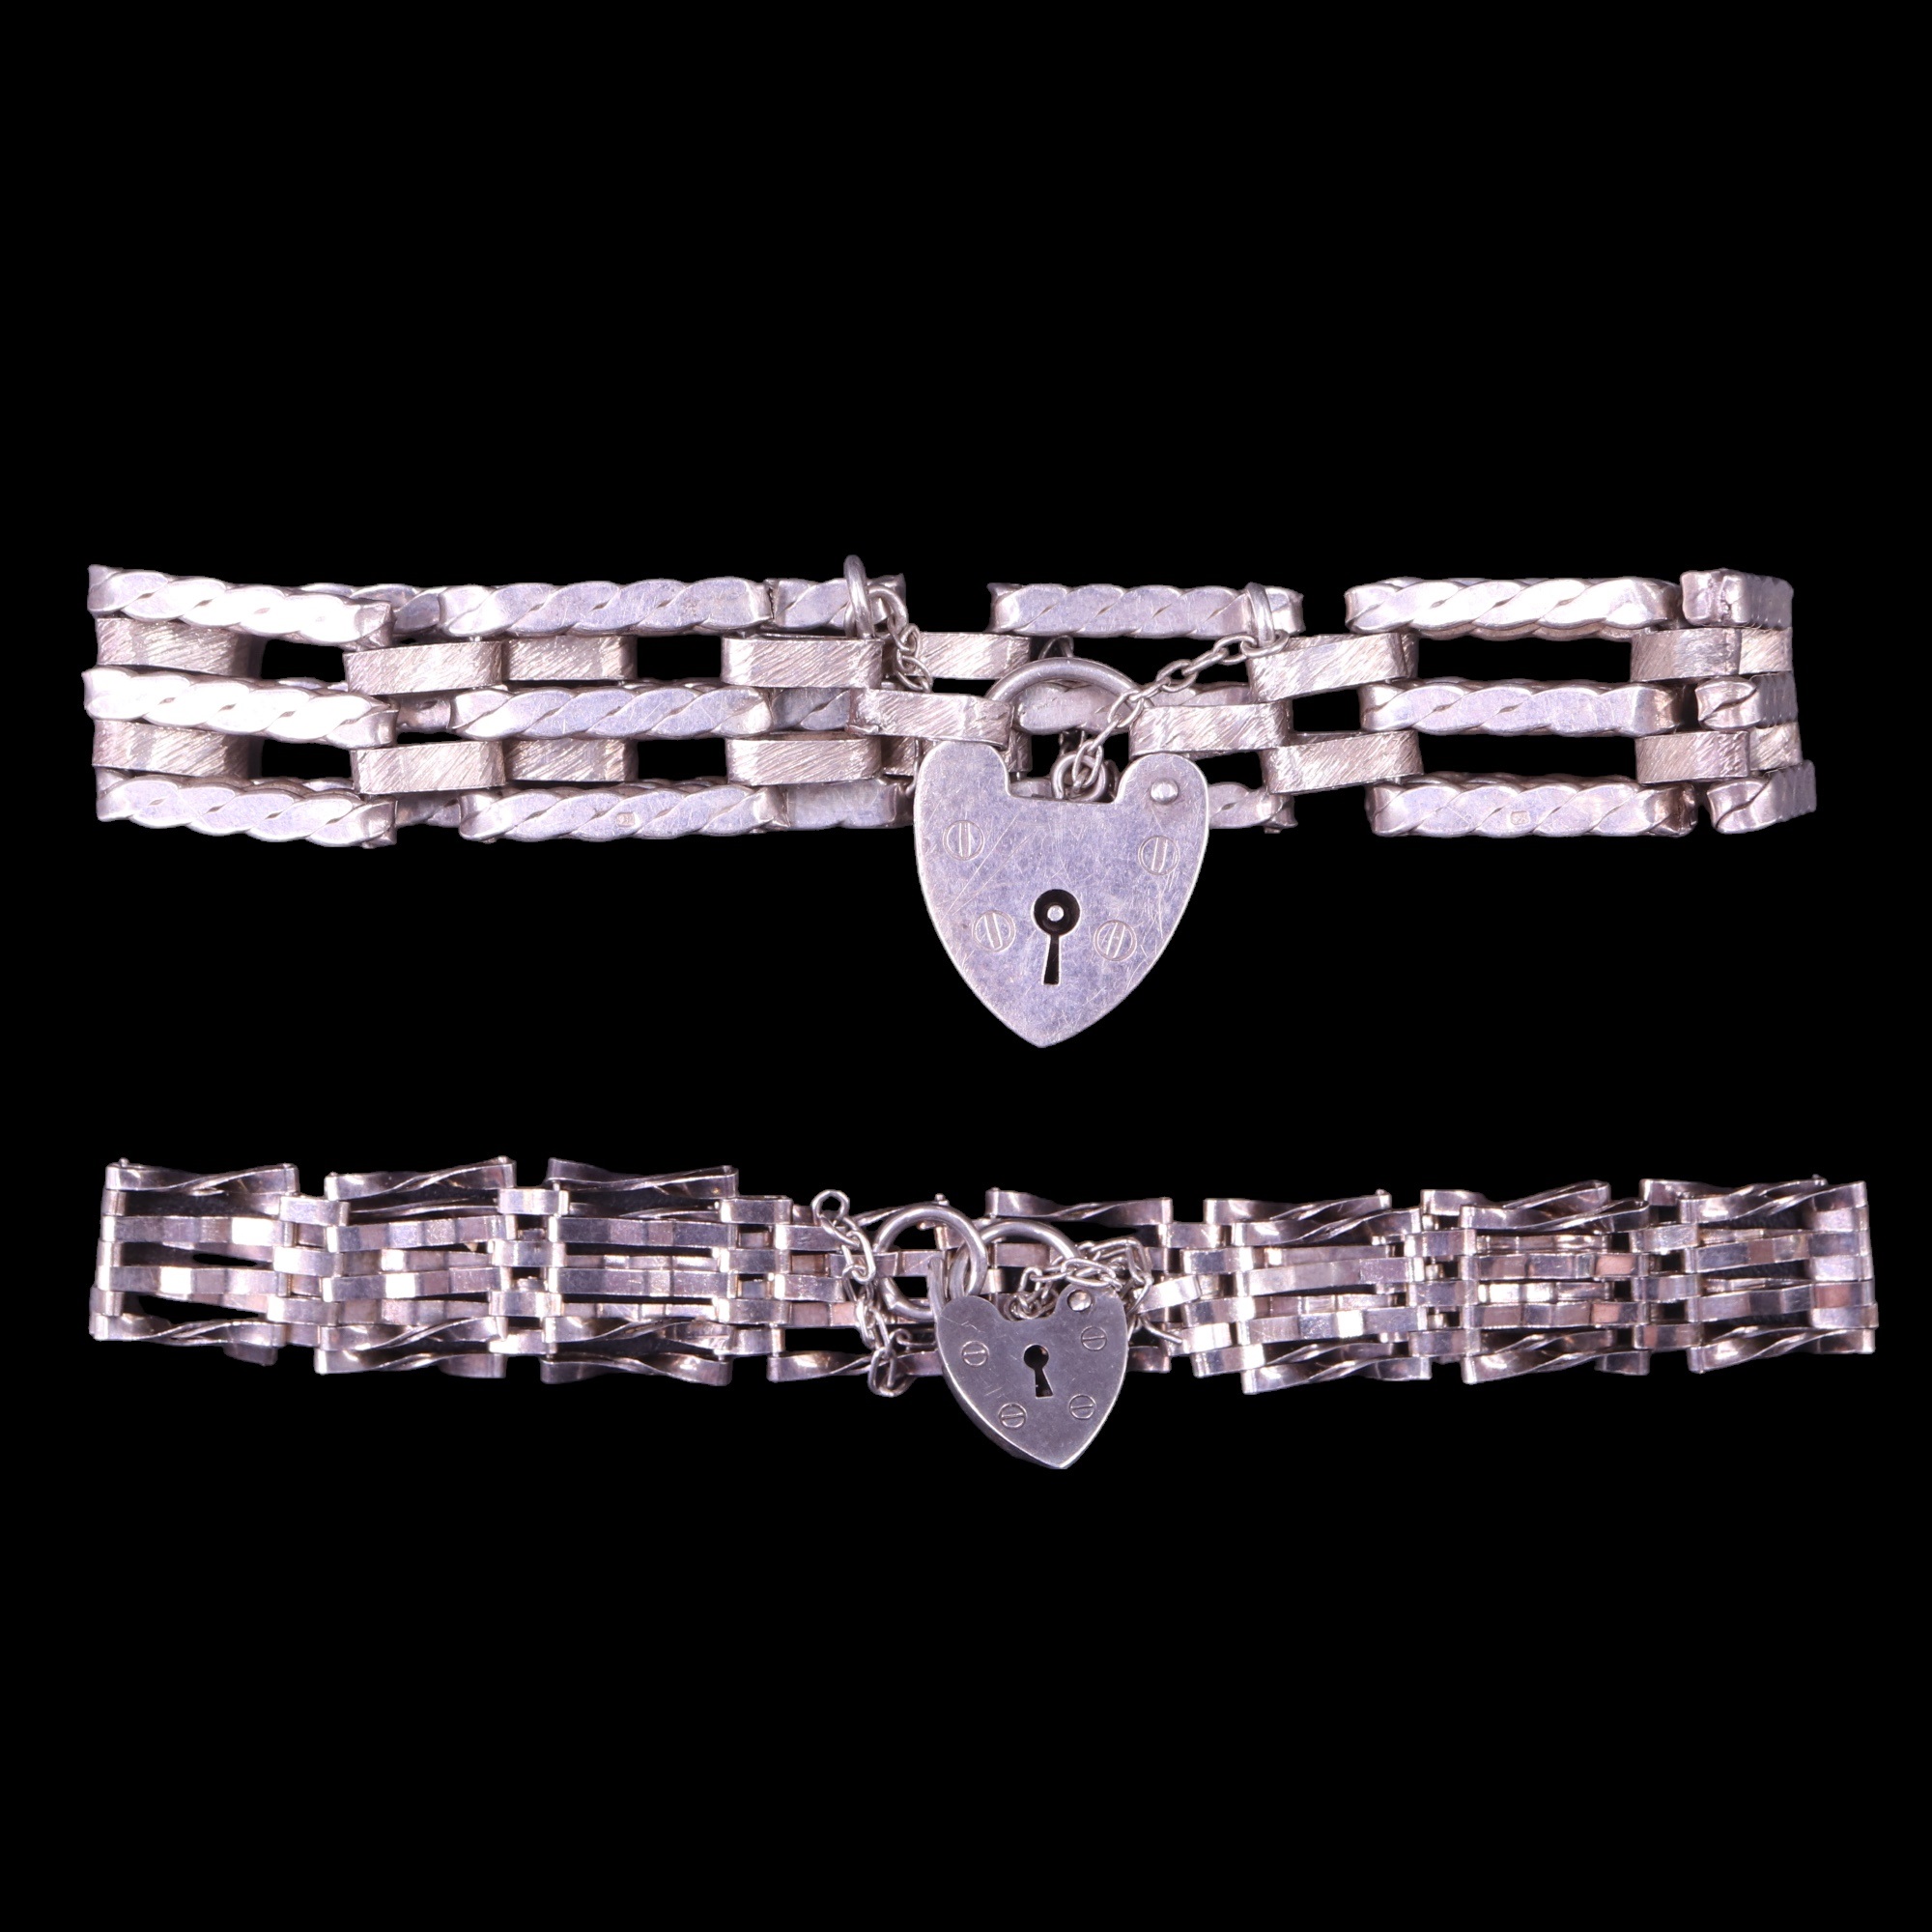 Silver / white metal traditional gate-link, T-bar-and-ring, fringed and other bracelets, 97 g - Image 4 of 7